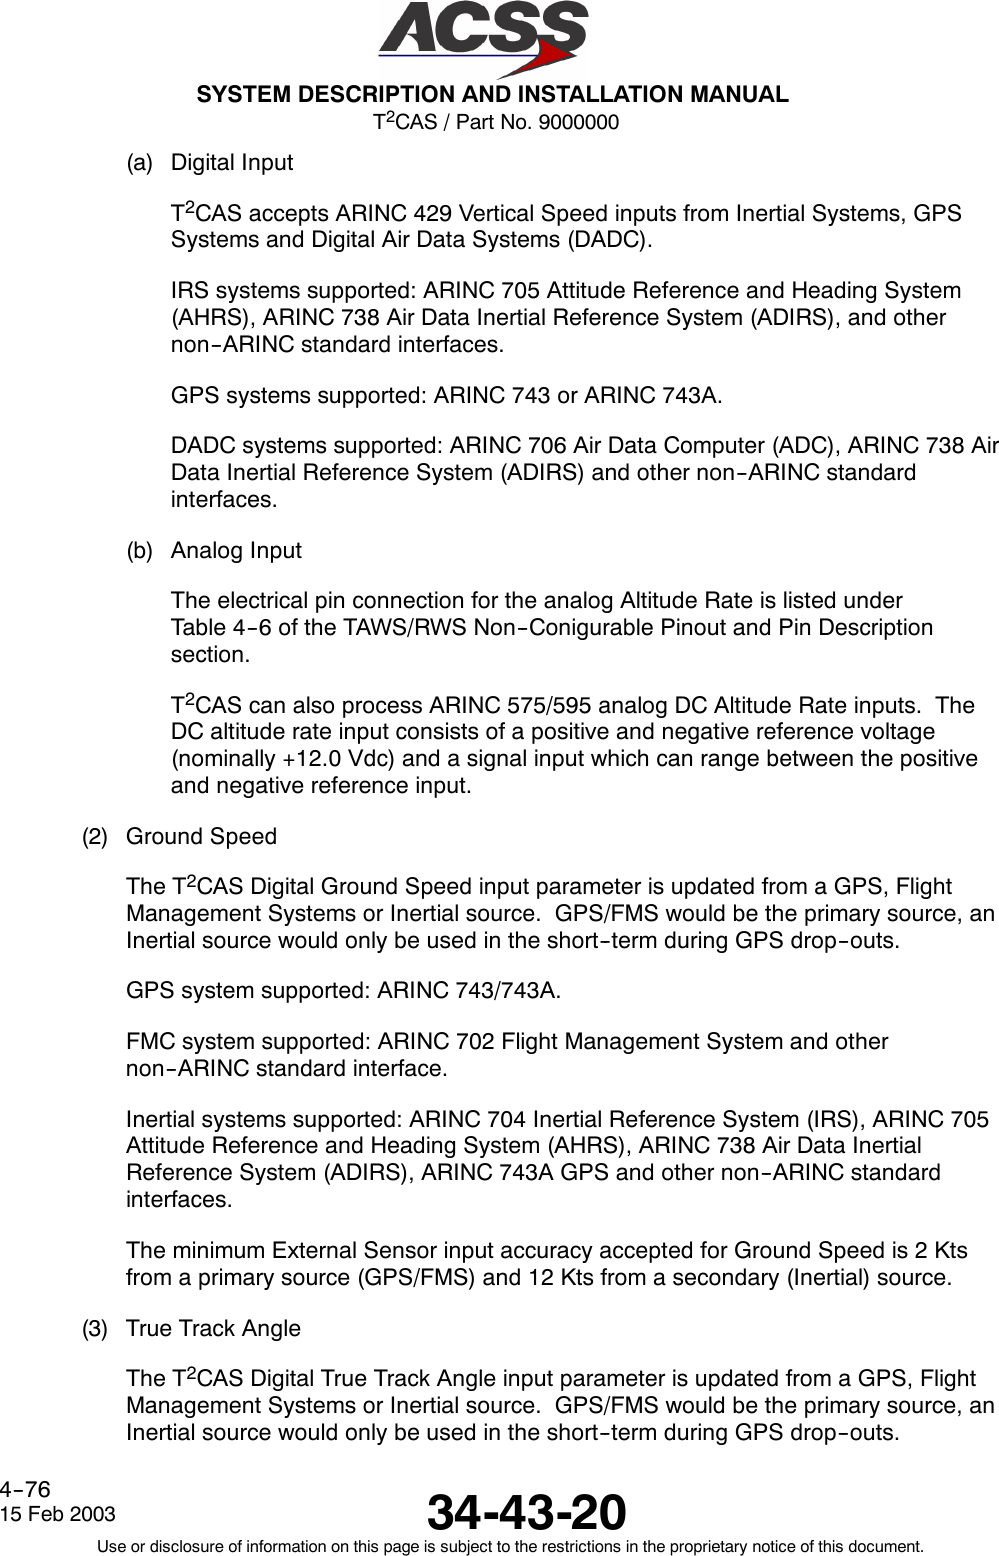 T2CAS / Part No. 9000000SYSTEM DESCRIPTION AND INSTALLATION MANUAL34-43-2015 Feb 2003Use or disclosure of information on this page is subject to the restrictions in the proprietary notice of this document.4--76(a) Digital InputT2CAS accepts ARINC 429 Vertical Speed inputs from Inertial Systems, GPSSystems and Digital Air Data Systems (DADC).IRS systems supported: ARINC 705 Attitude Reference and Heading System(AHRS), ARINC 738 Air Data Inertial Reference System (ADIRS), and othernon--ARINC standard interfaces.GPS systems supported: ARINC 743 or ARINC 743A.DADC systems supported: ARINC 706 Air Data Computer (ADC), ARINC 738 AirData Inertial Reference System (ADIRS) and other non--ARINC standardinterfaces.(b) Analog InputThe electrical pin connection for the analog Altitude Rate is listed underTable 4--6 of the TAWS/RWS Non--Conigurable Pinout and Pin Descriptionsection.T2CAS can also process ARINC 575/595 analog DC Altitude Rate inputs. TheDC altitude rate input consists of a positive and negative reference voltage(nominally +12.0 Vdc) and a signal input which can range between the positiveand negative reference input.(2) Ground SpeedThe T2CAS Digital Ground Speed input parameter is updated from a GPS, FlightManagement Systems or Inertial source. GPS/FMS would be the primary source, anInertial source would only be used in the short--term during GPS drop--outs.GPS system supported: ARINC 743/743A.FMC system supported: ARINC 702 Flight Management System and othernon--ARINC standard interface.Inertial systems supported: ARINC 704 Inertial Reference System (IRS), ARINC 705Attitude Reference and Heading System (AHRS), ARINC 738 Air Data InertialReference System (ADIRS), ARINC 743A GPS and other non--ARINC standardinterfaces.The minimum External Sensor input accuracy accepted for Ground Speed is 2 Ktsfrom a primary source (GPS/FMS) and 12 Kts from a secondary (Inertial) source.(3) True Track AngleThe T2CAS Digital True Track Angle input parameter is updated from a GPS, FlightManagement Systems or Inertial source. GPS/FMS would be the primary source, anInertial source would only be used in the short--term during GPS drop--outs.